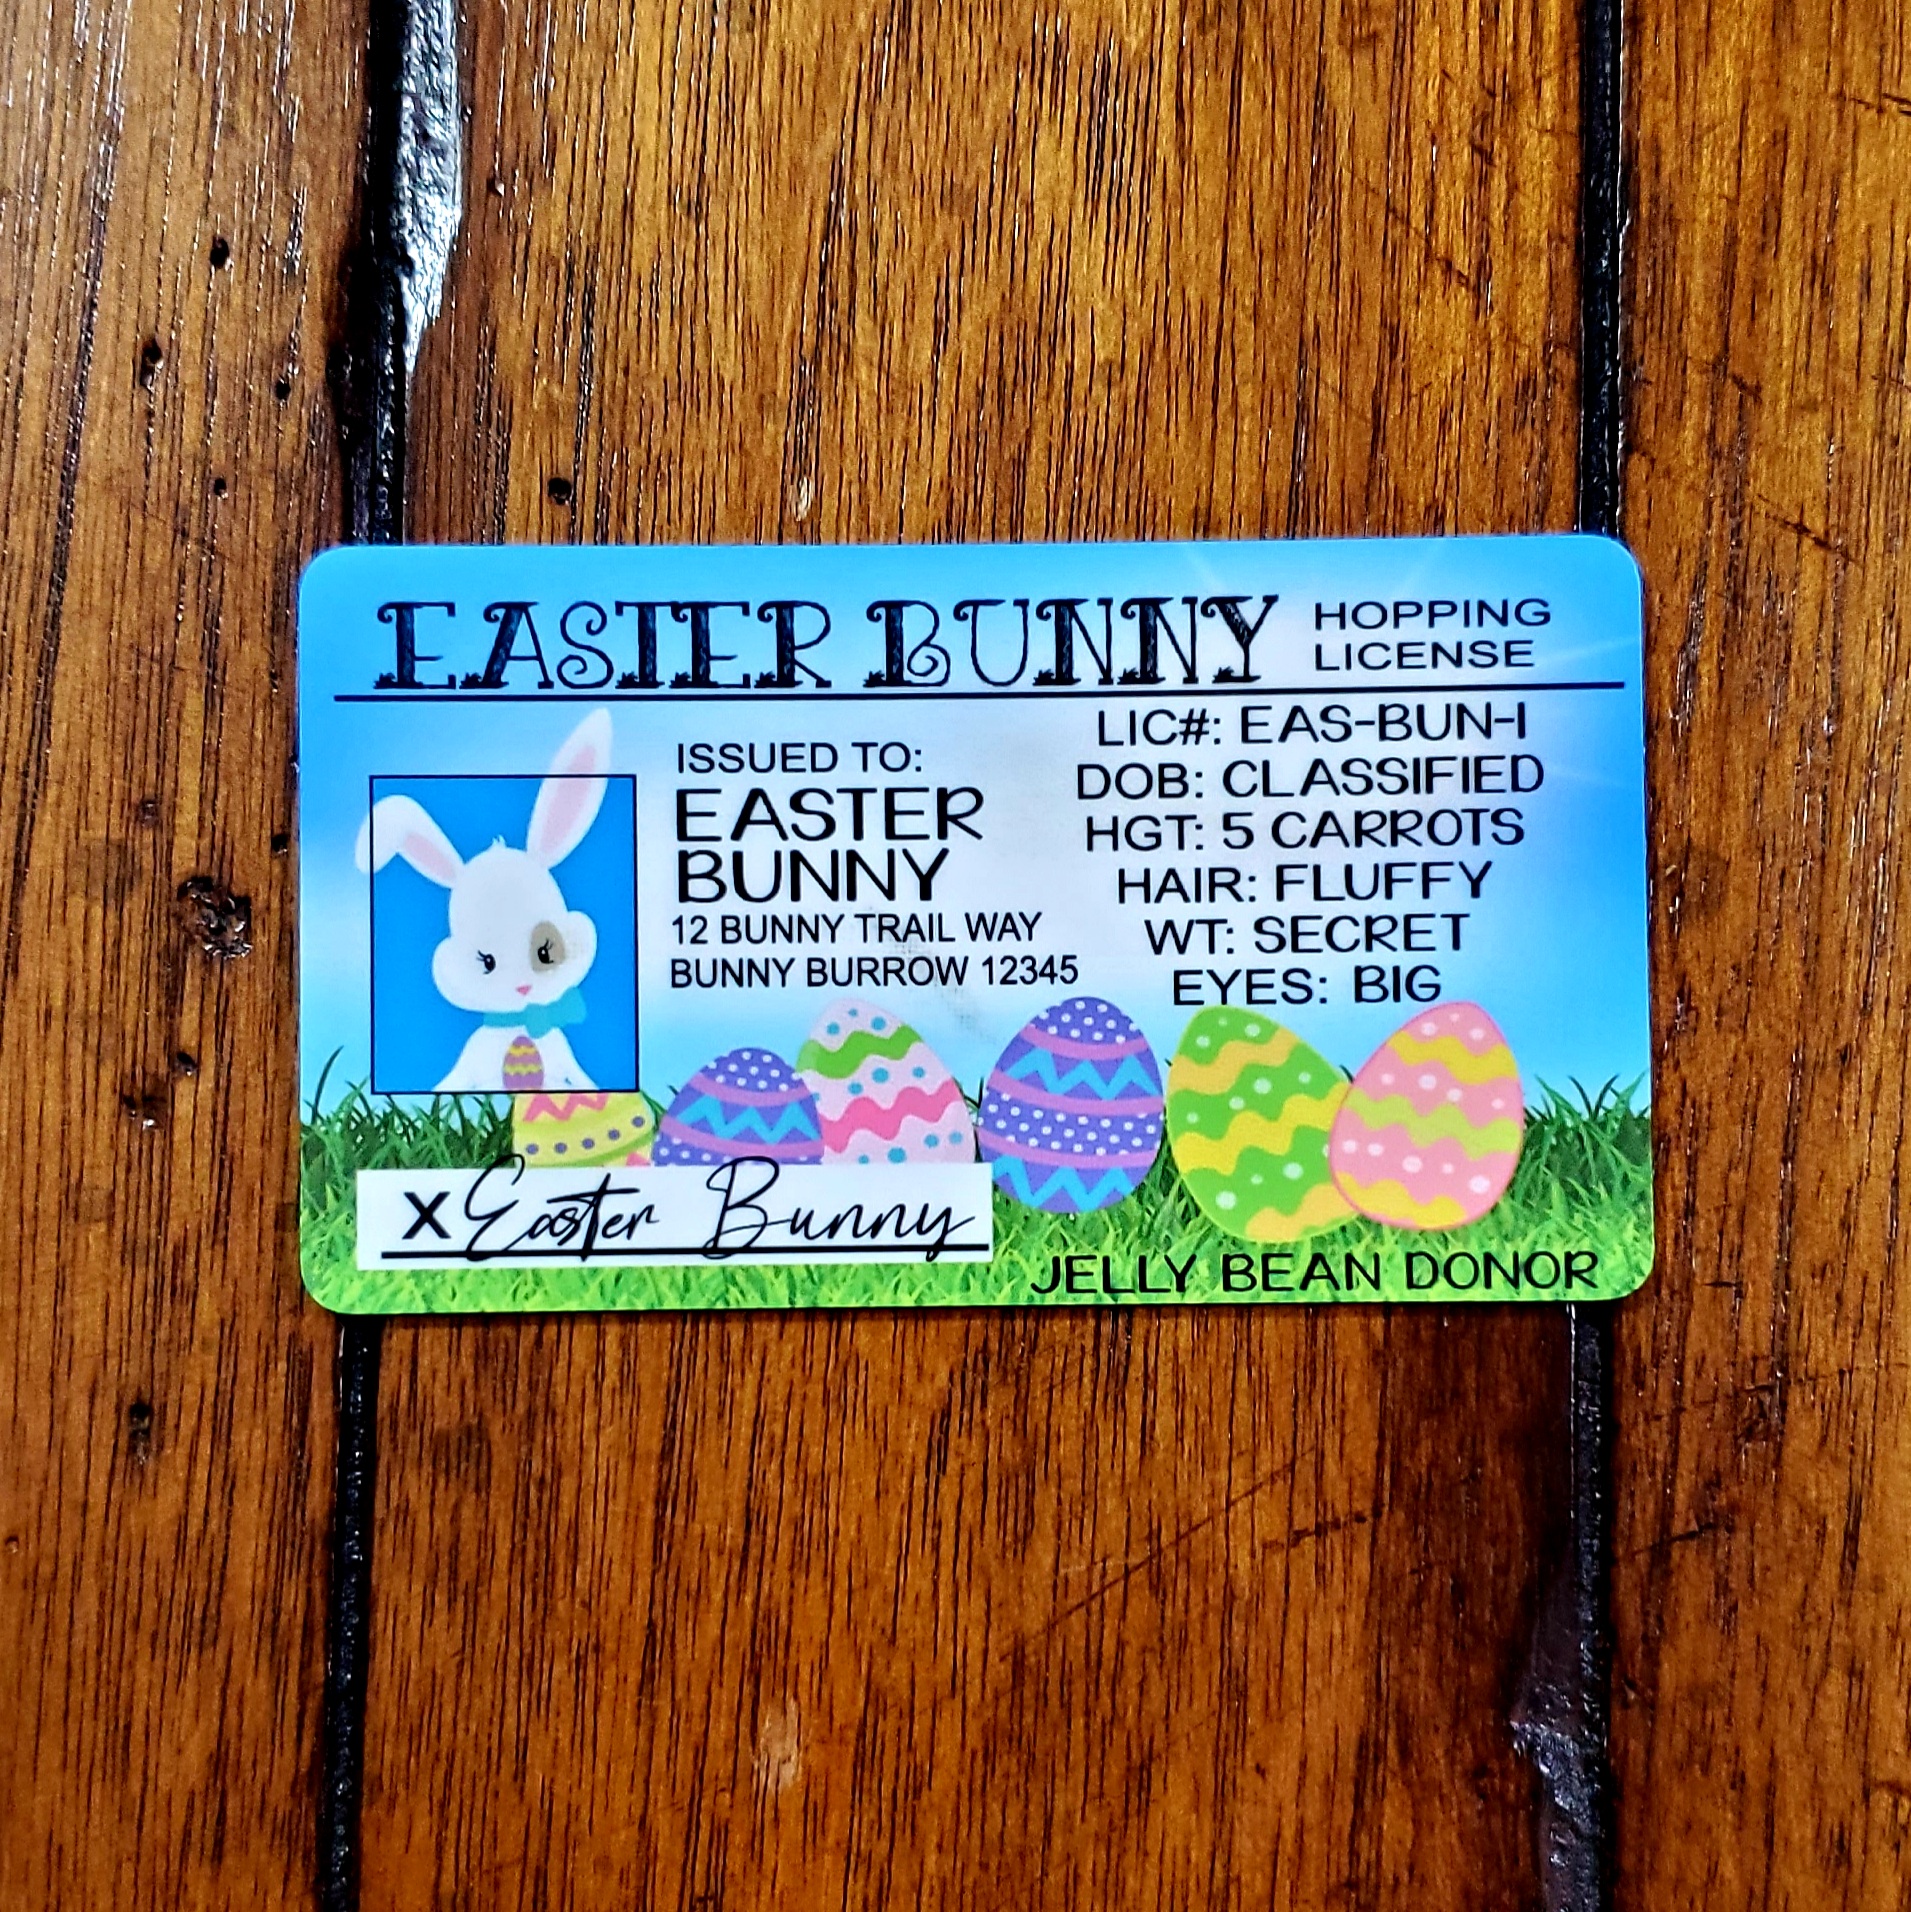 Easter Bunny Hopping License made with sublimation printing